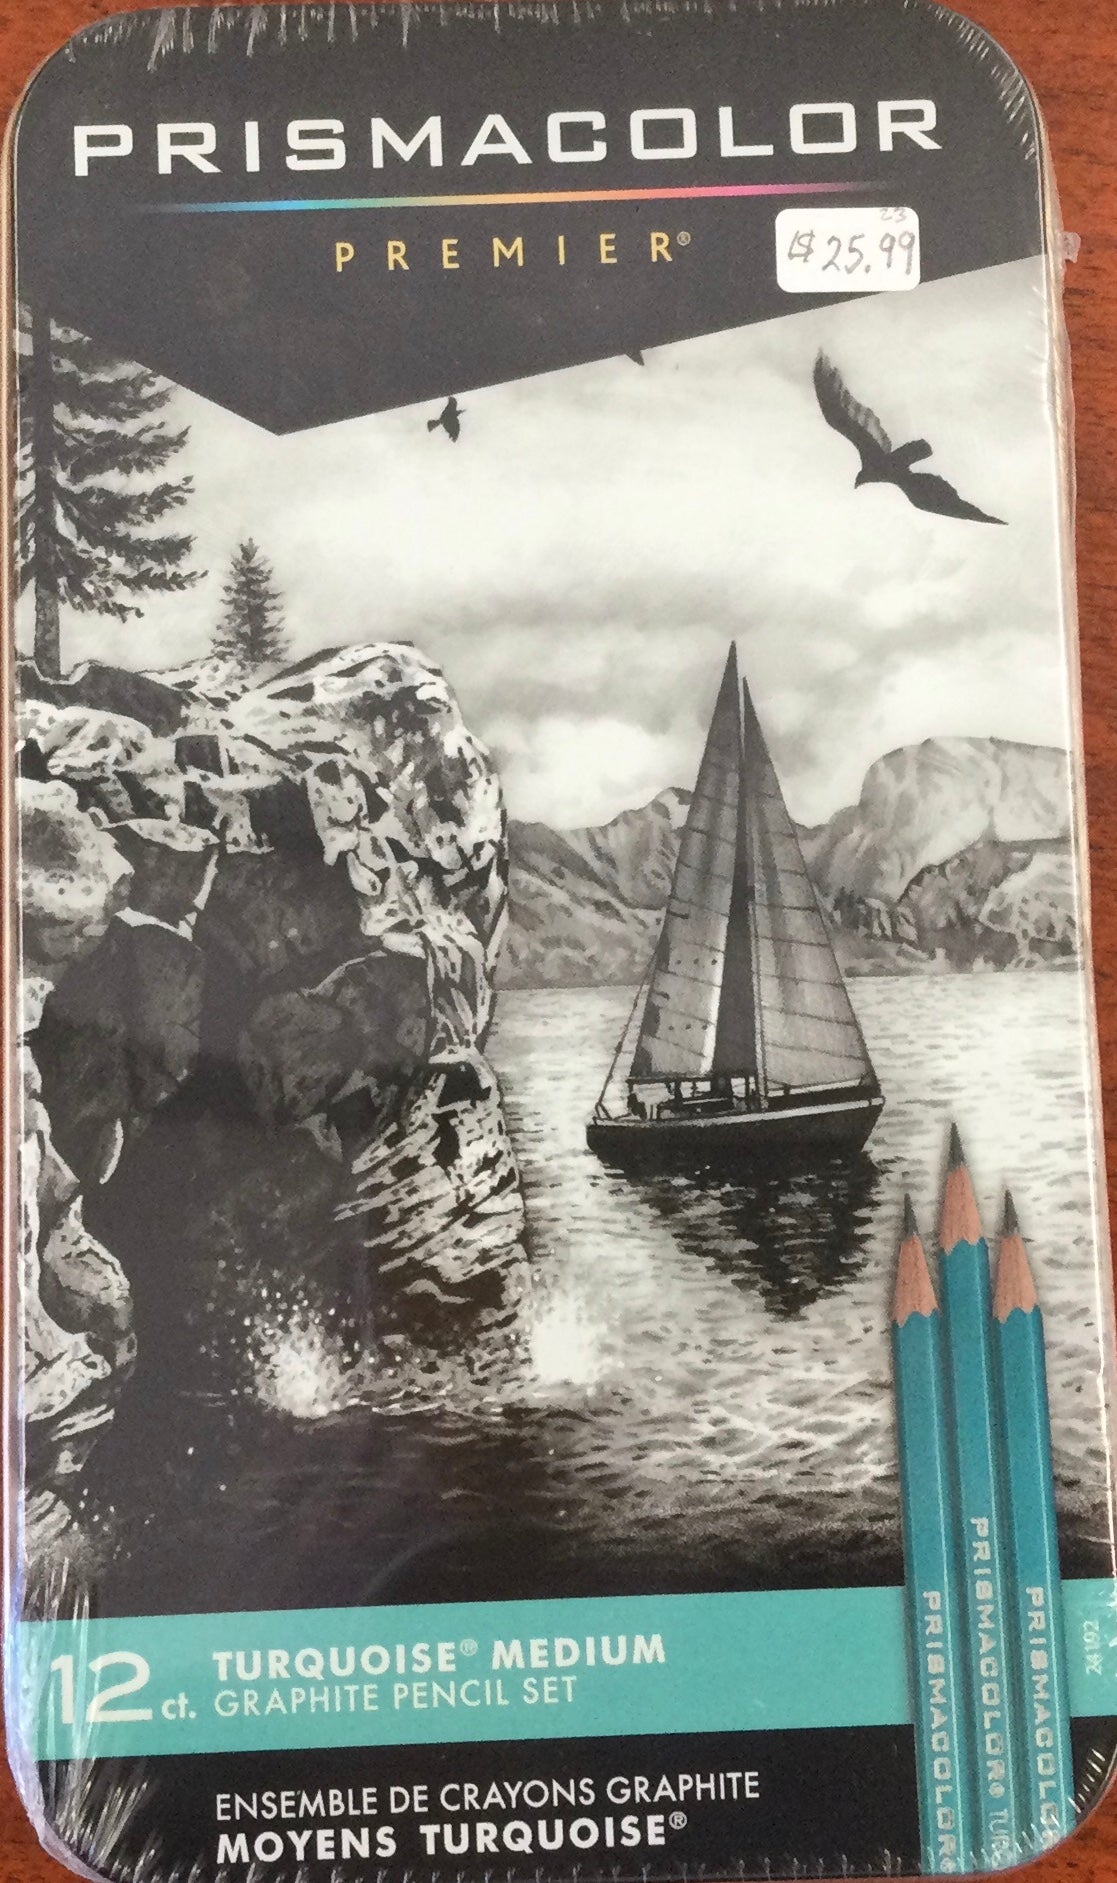 Prismacolor - Turquoise sketching pencils